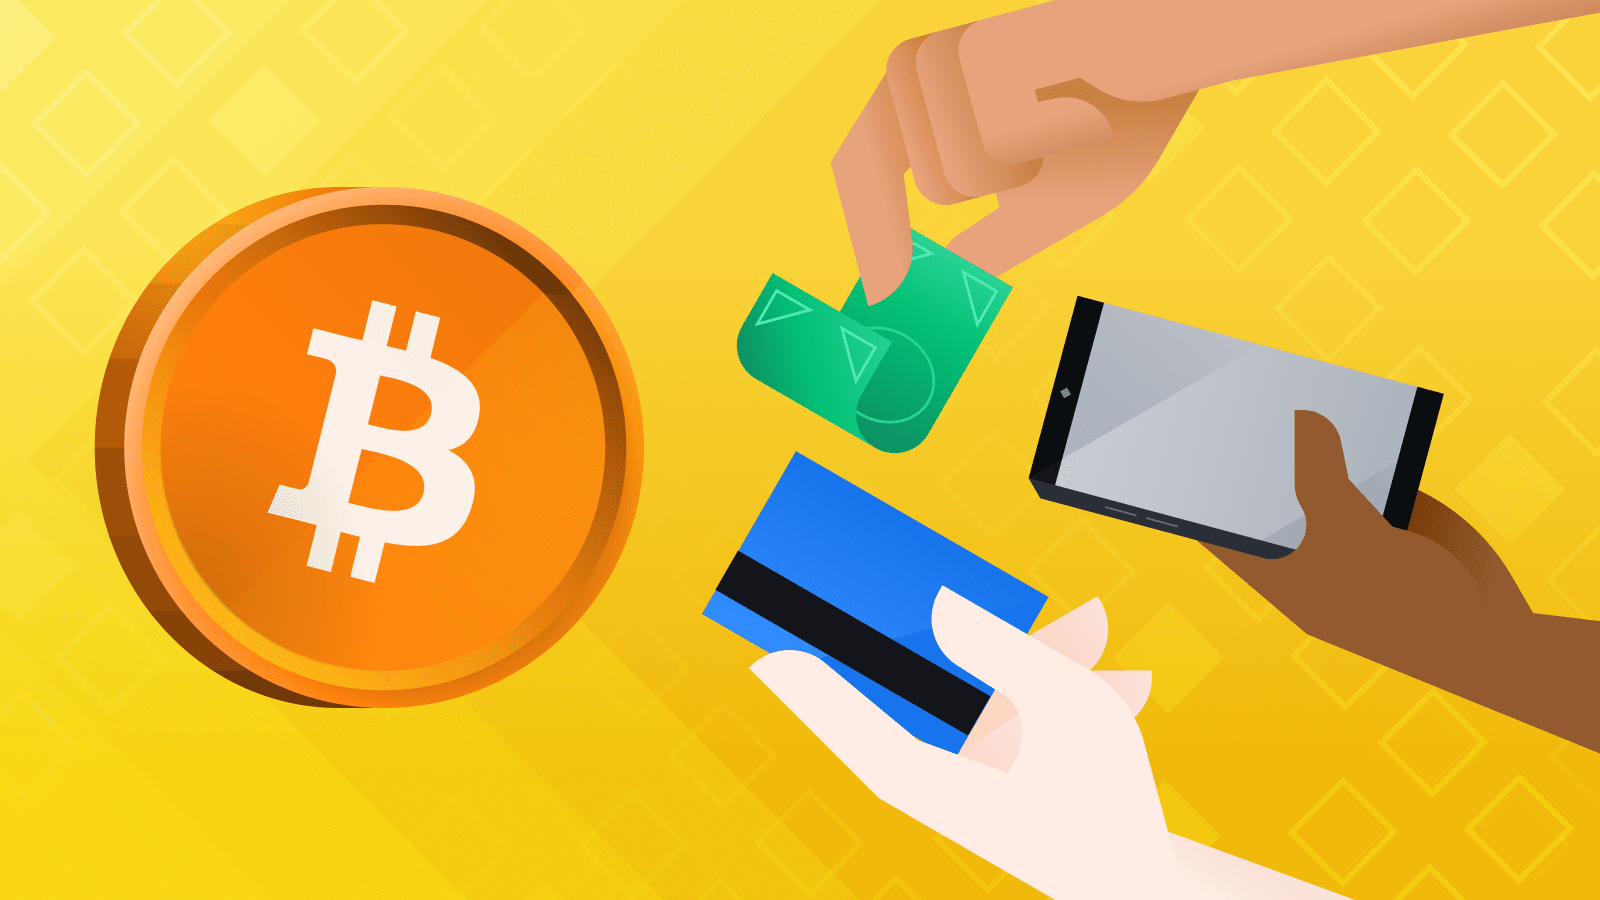 Nigerians can now buy cryptocurrency via instant bank transfers thanks to MetaMask’s partnership with MoonPay